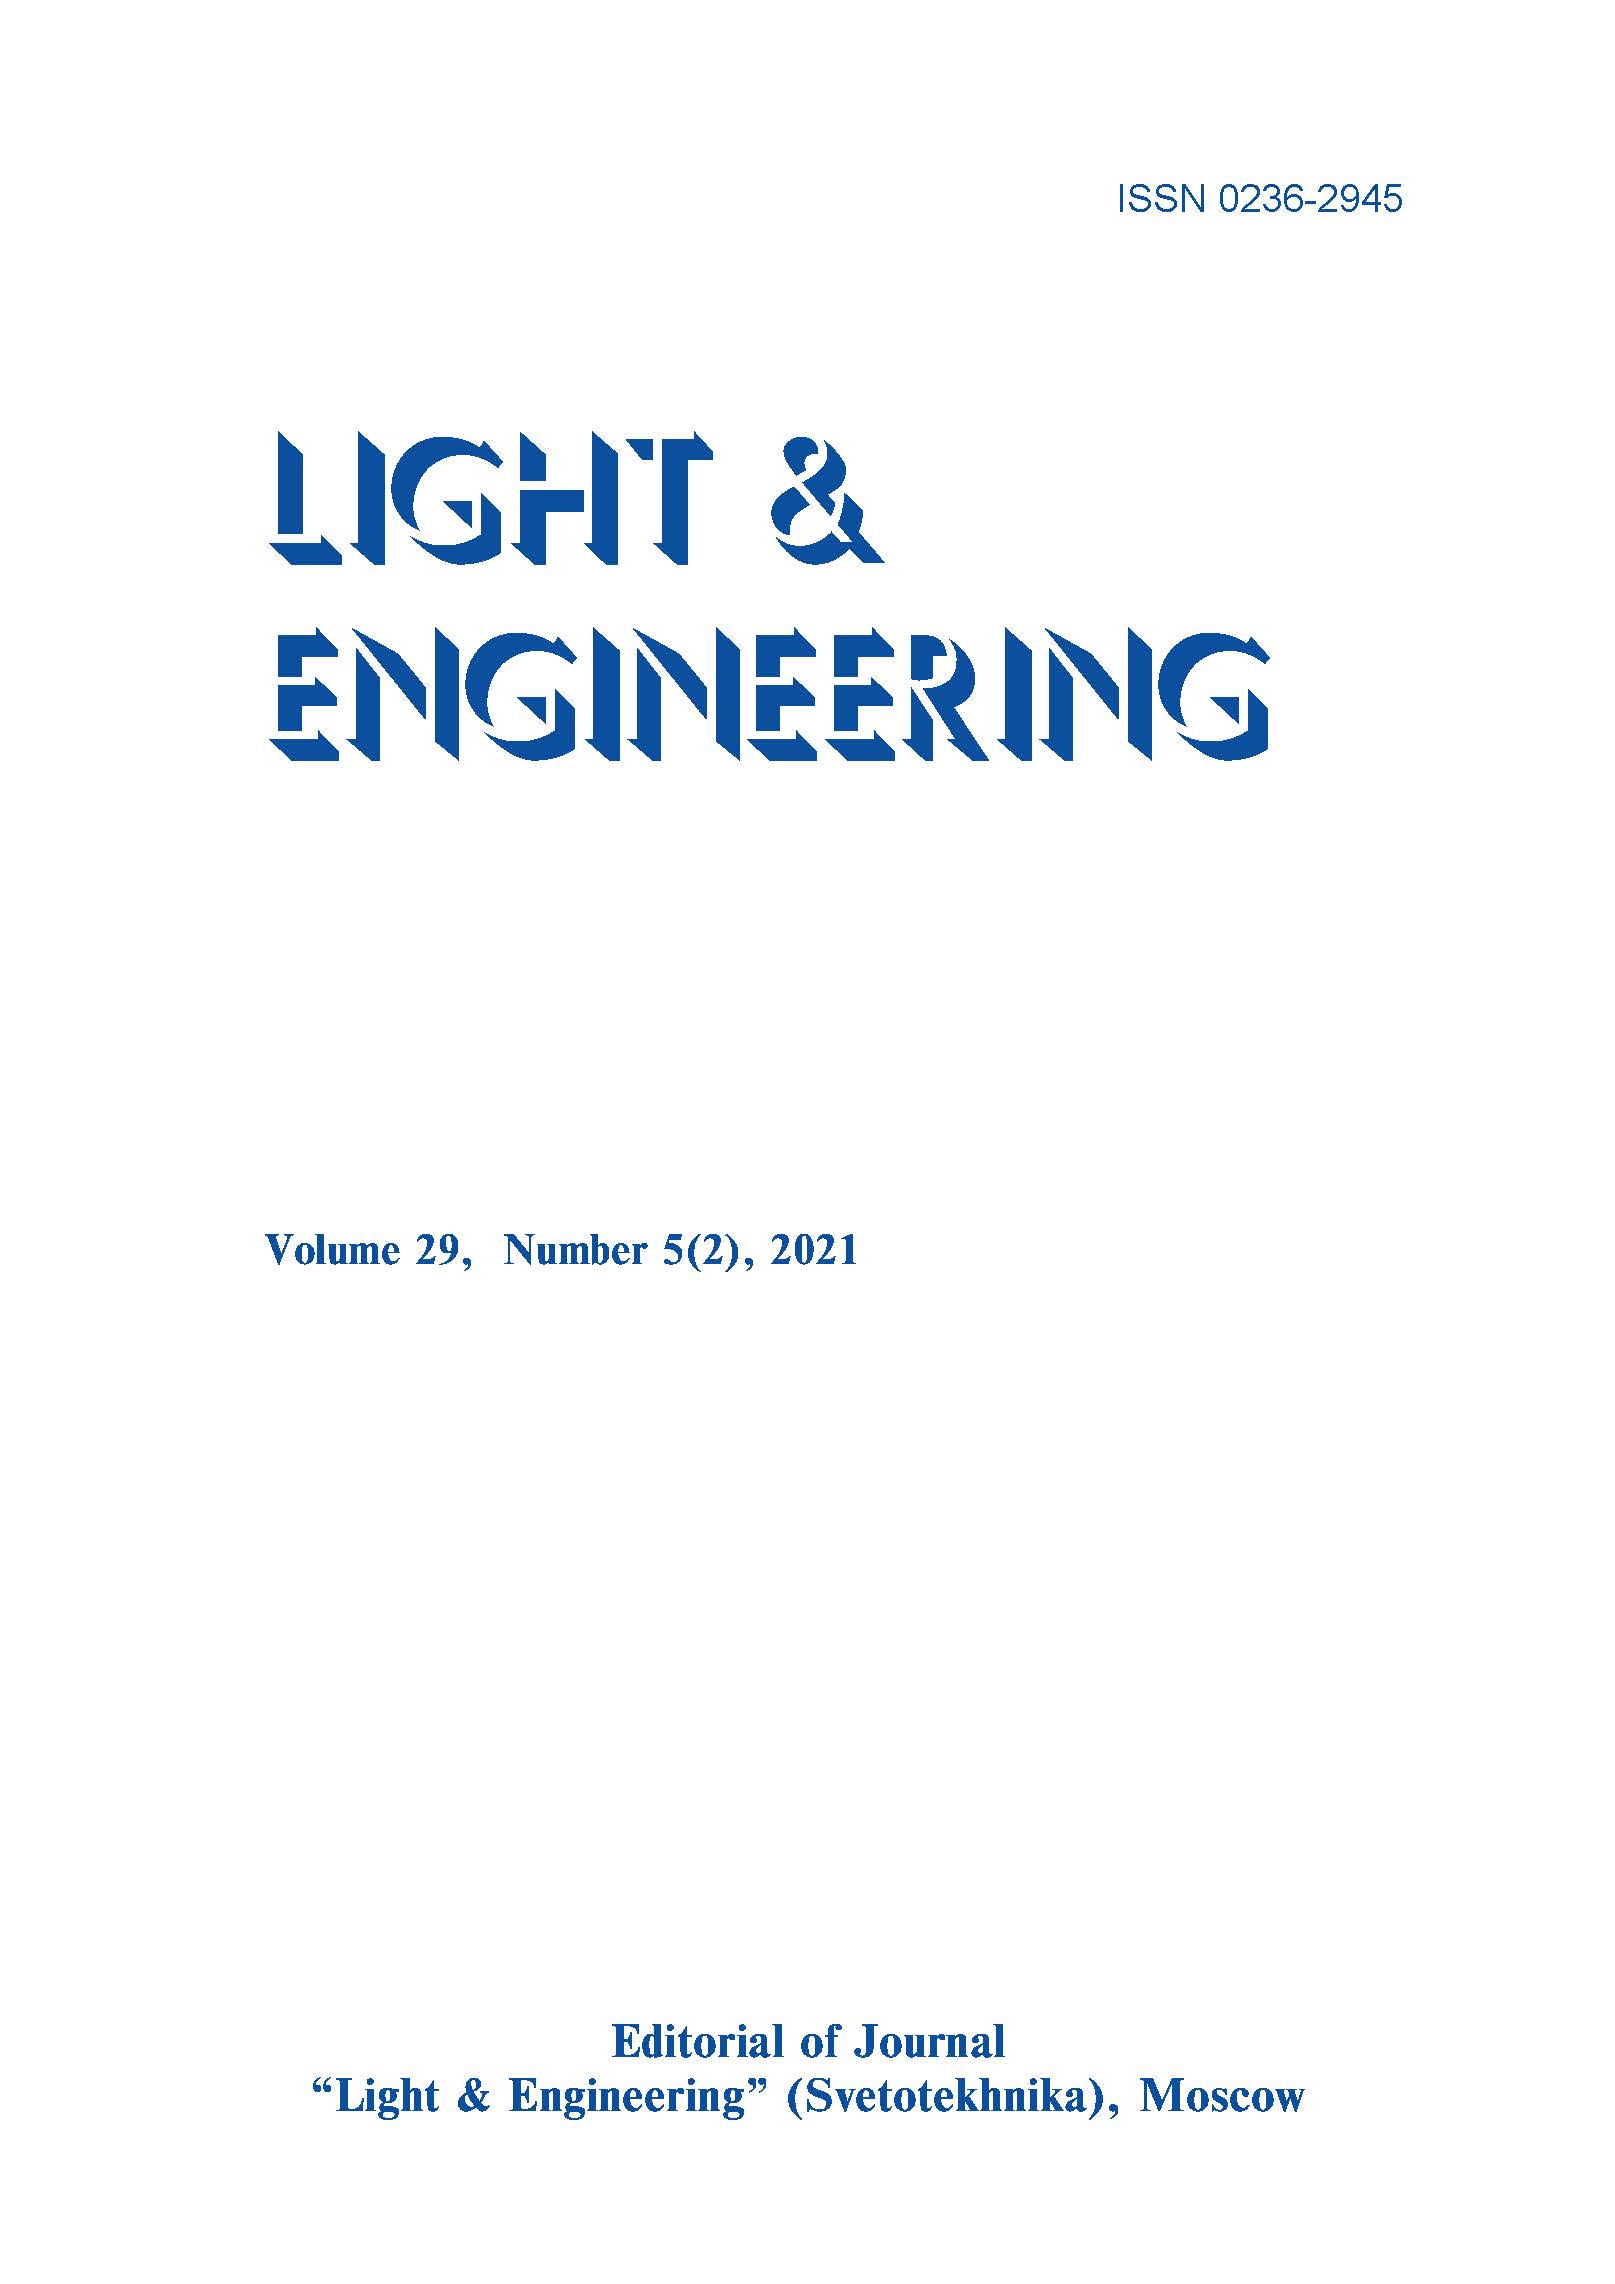 Generalized Optical Theorem and Point Sources L&E, Vol. 29, No. 5 (2), 2021